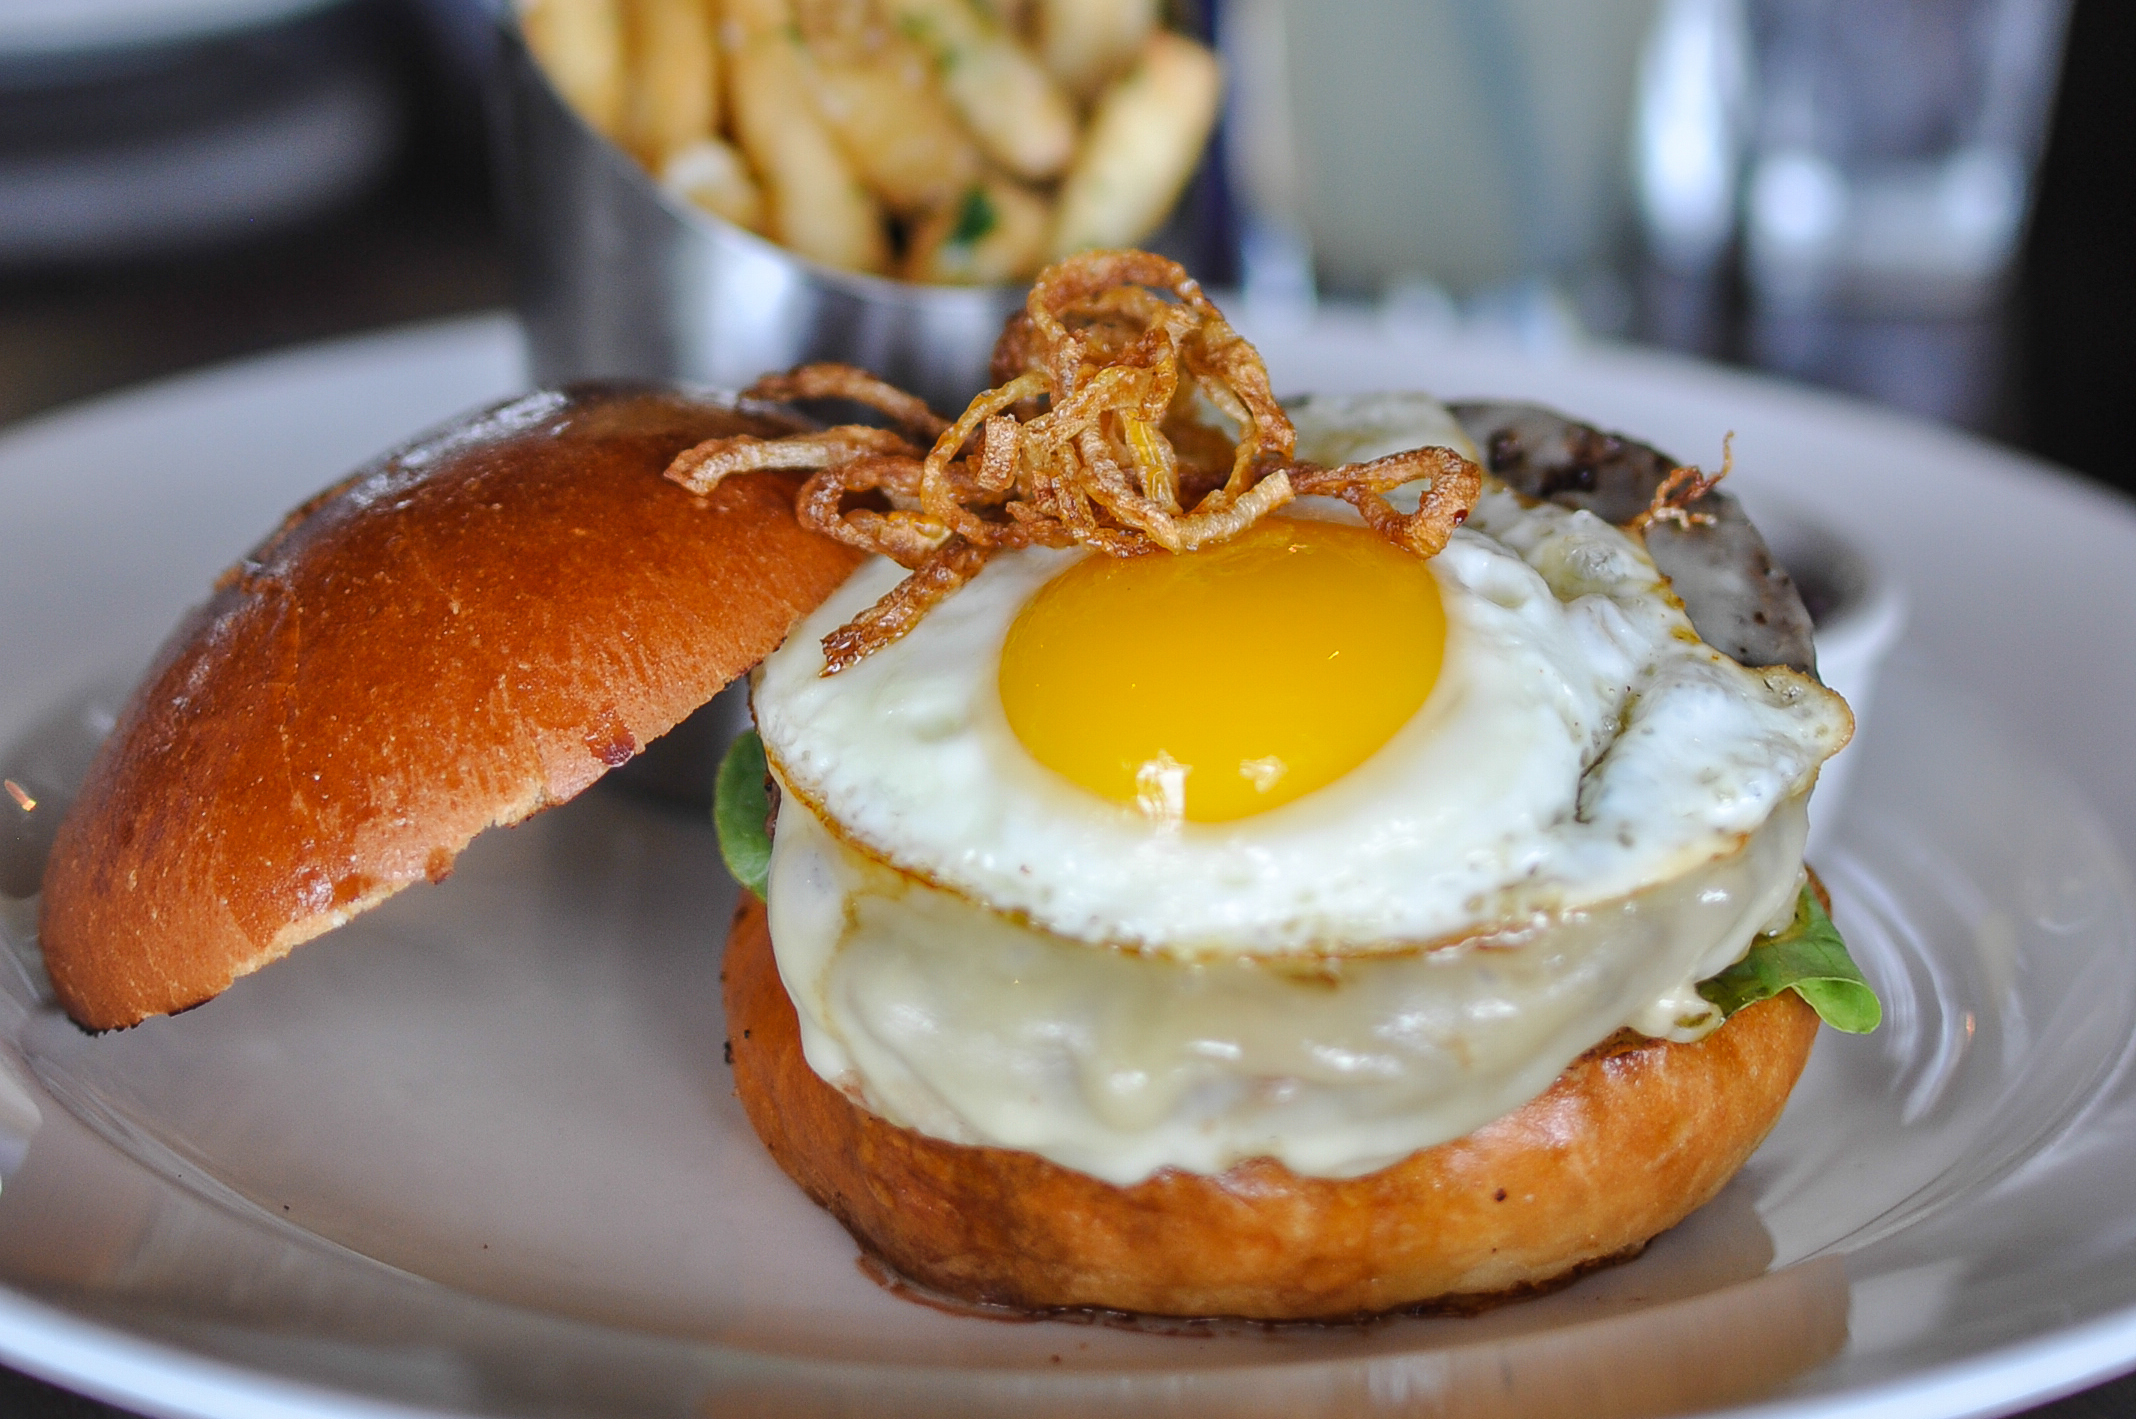 The Capital Grille Rolls out New “Wagyu” Burger menu for lunch